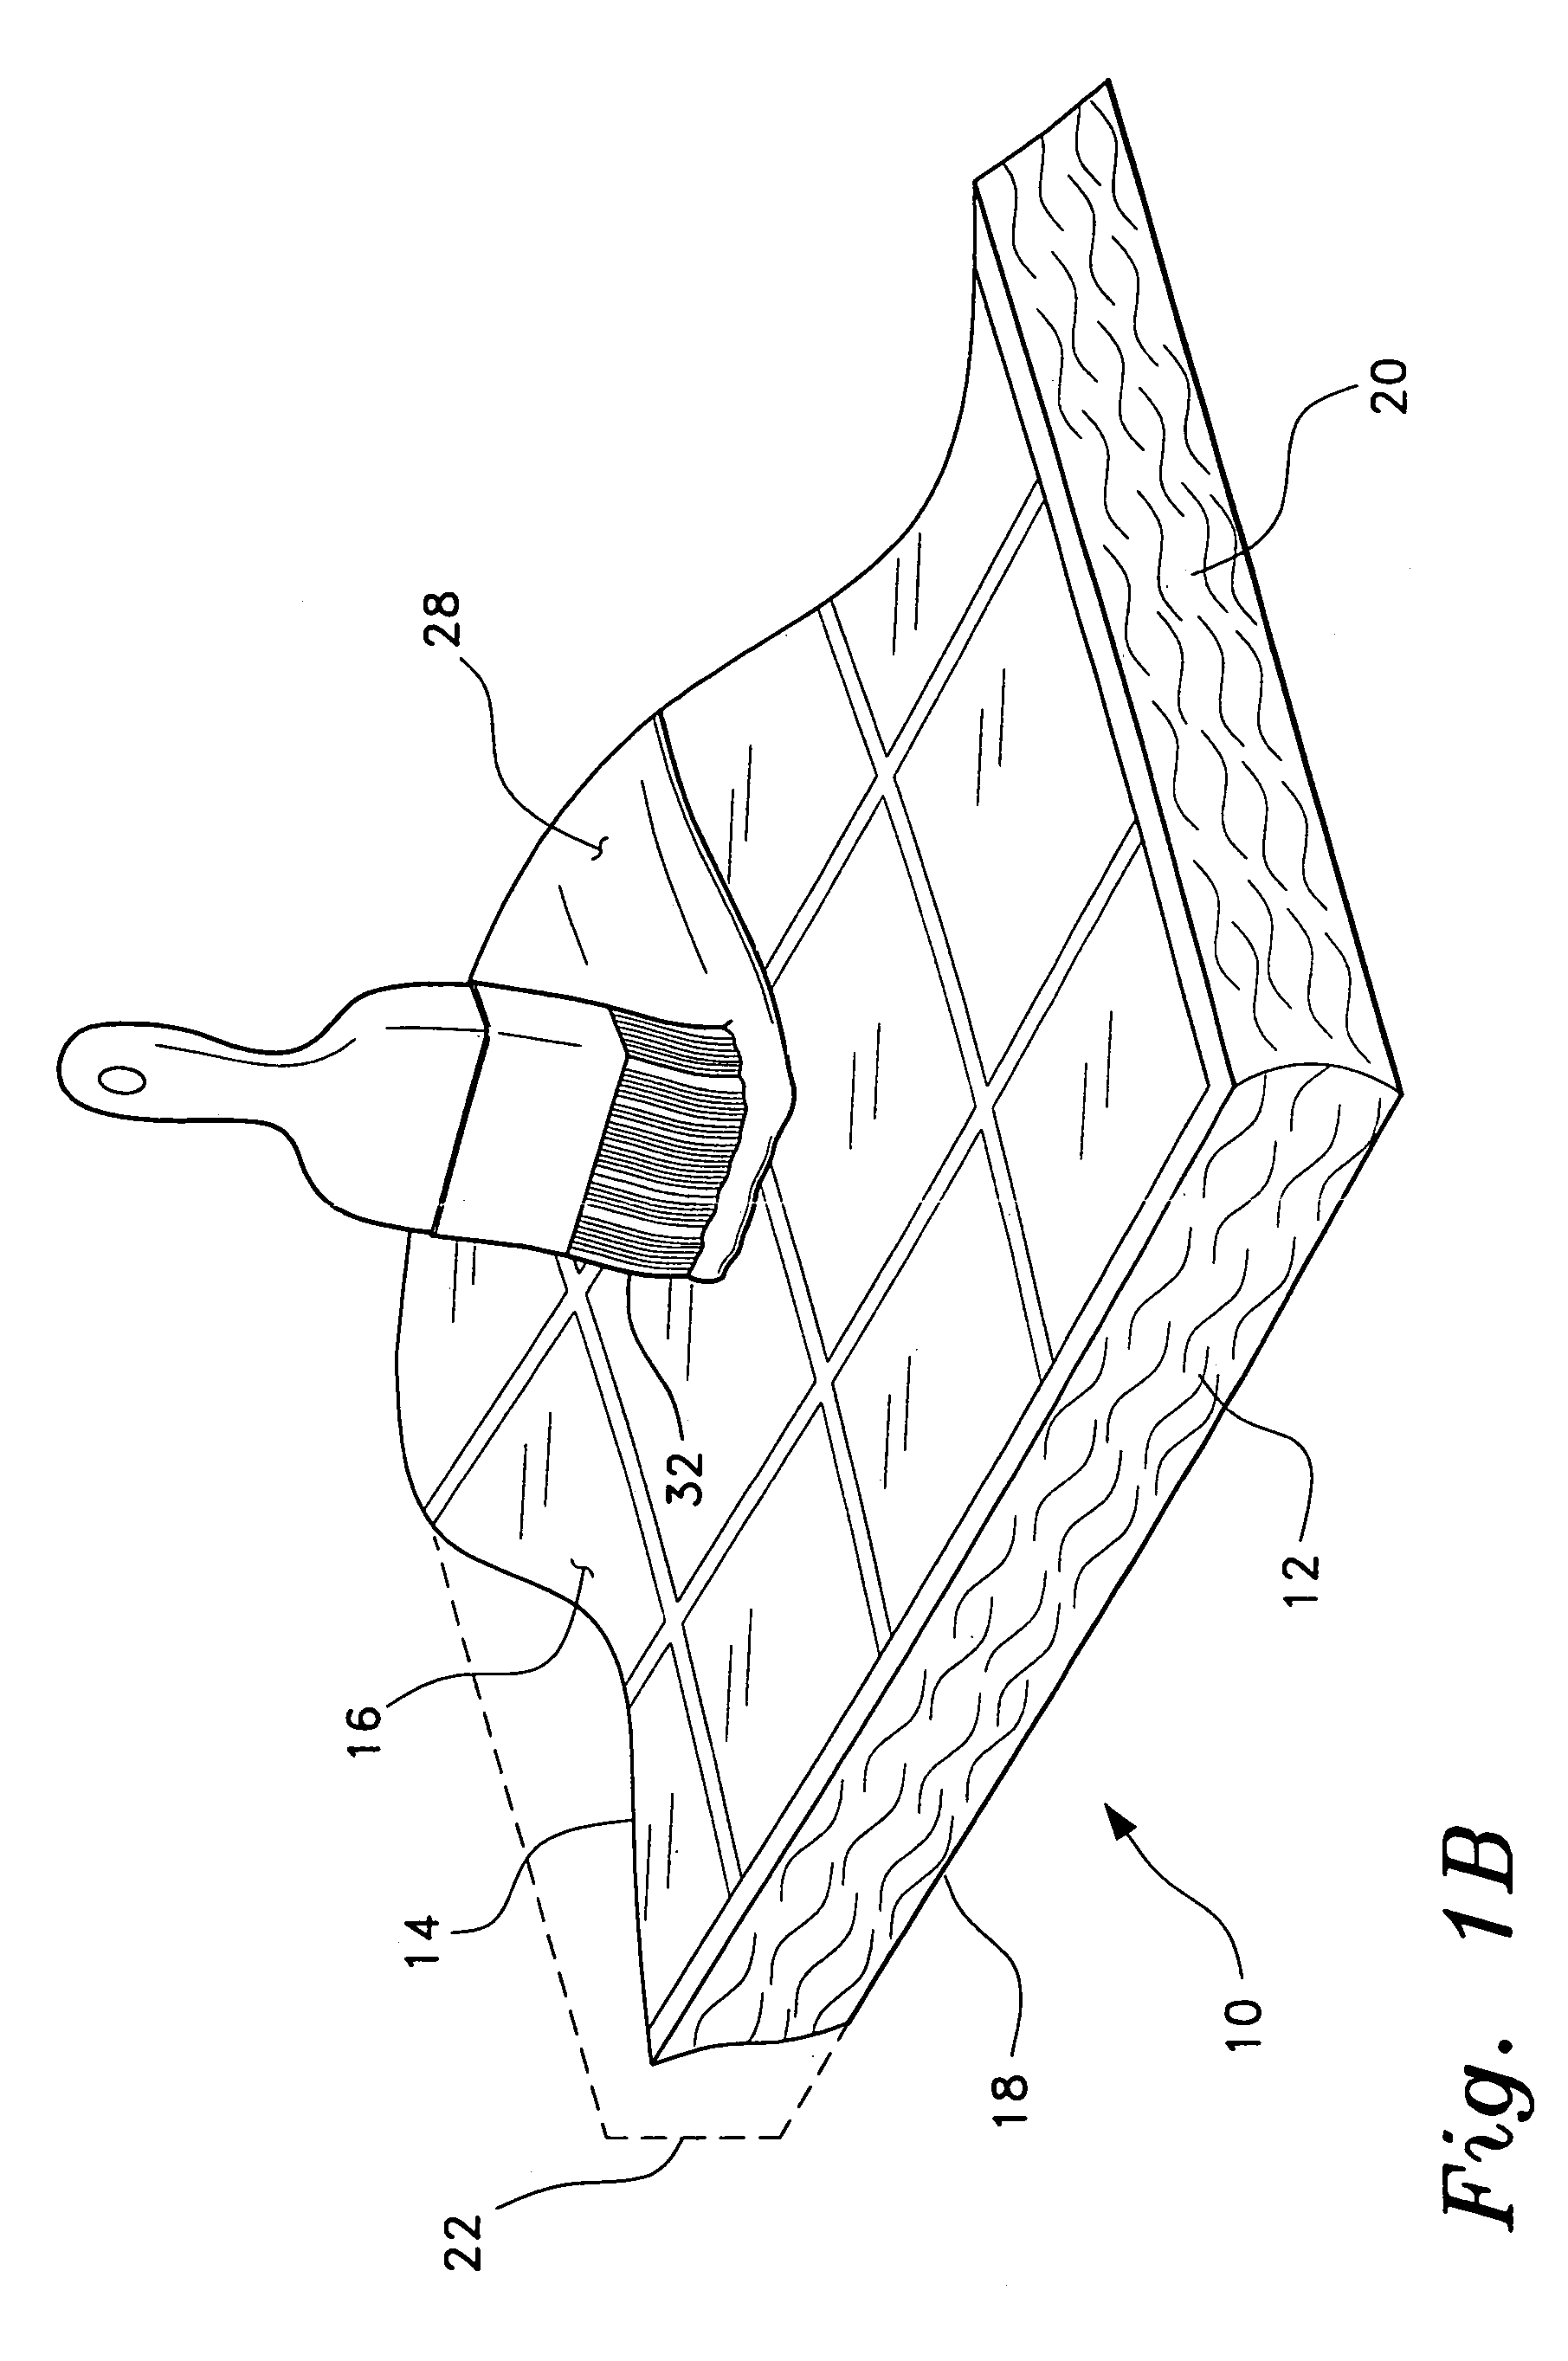 Method of applying a heat reflective coating to a substrate sheet